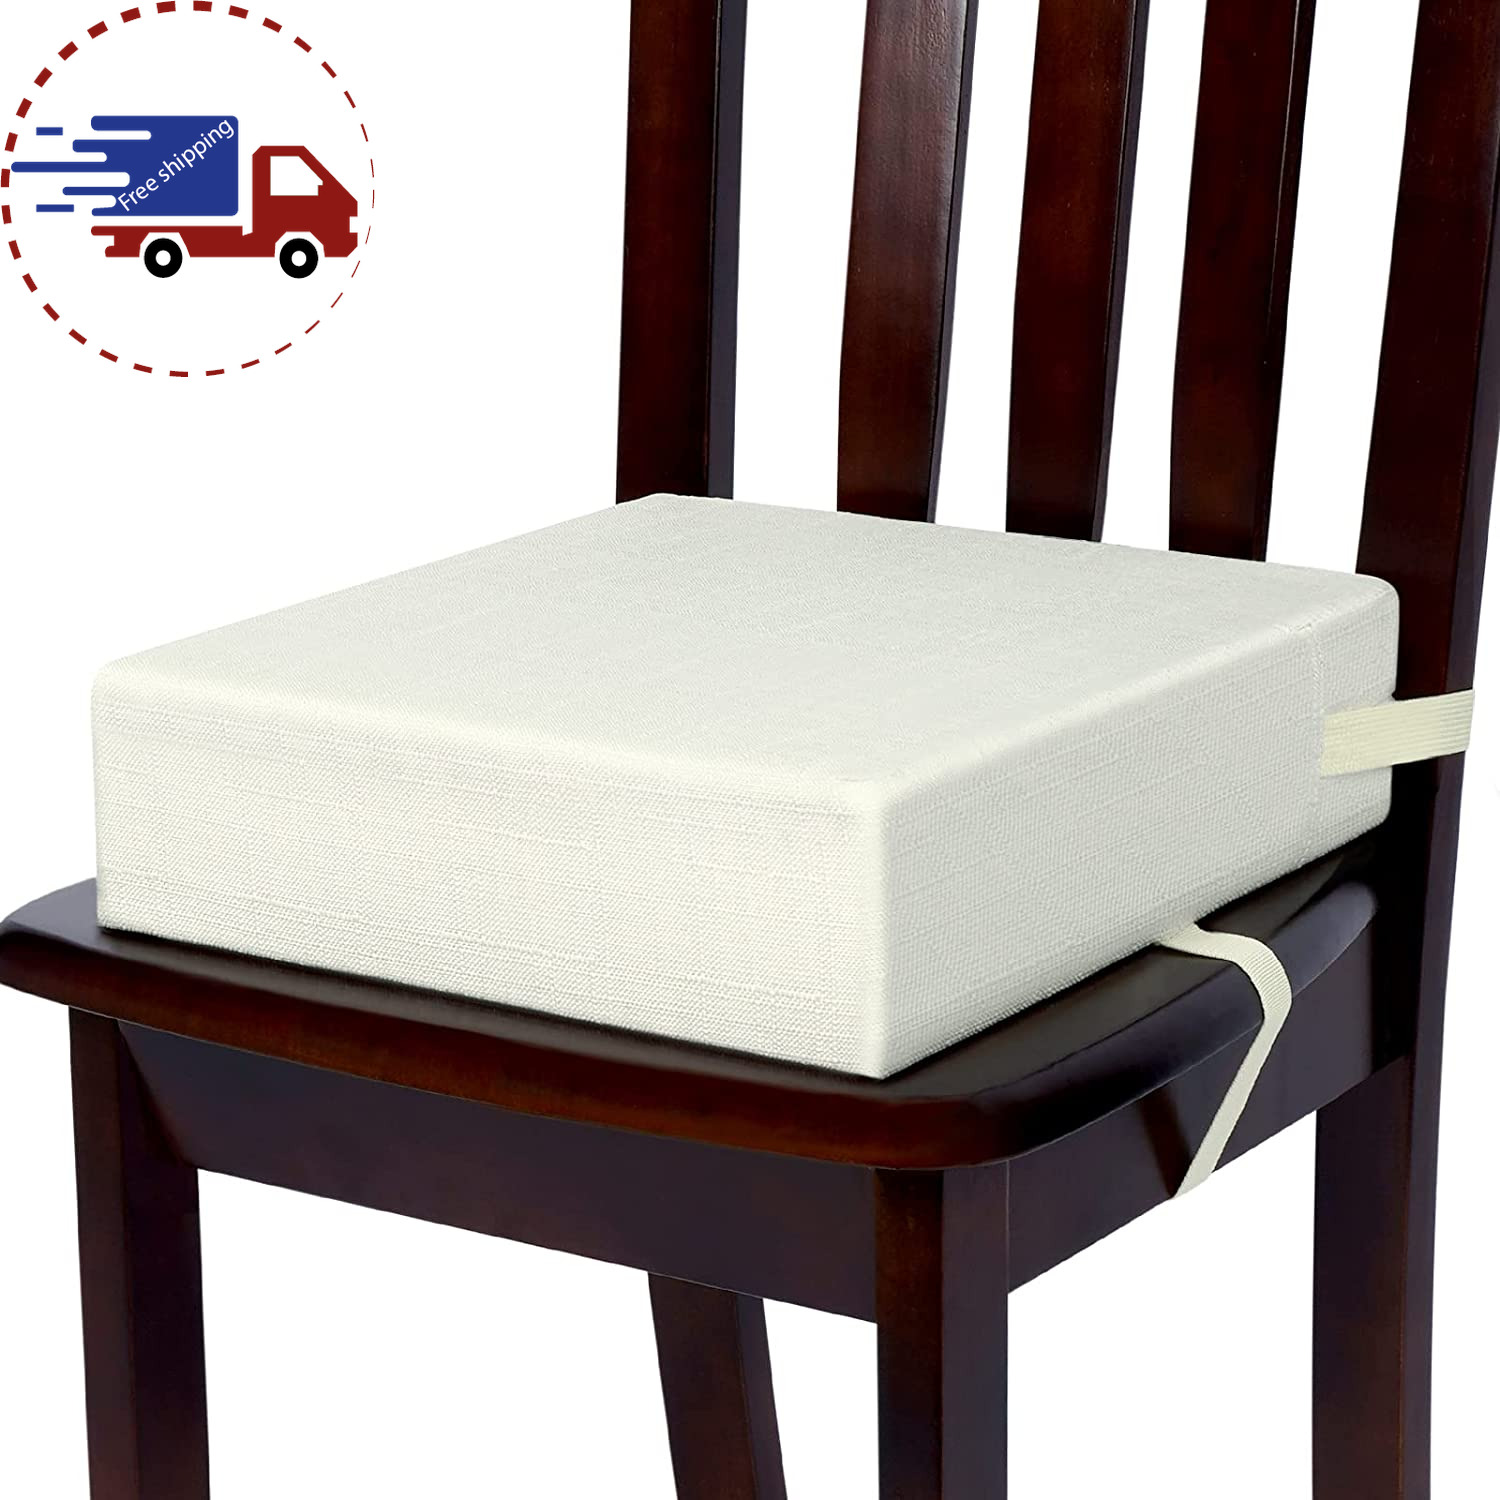 Booster Seat for Dining Table Toddler, Portable Big Size Support Booster Chair